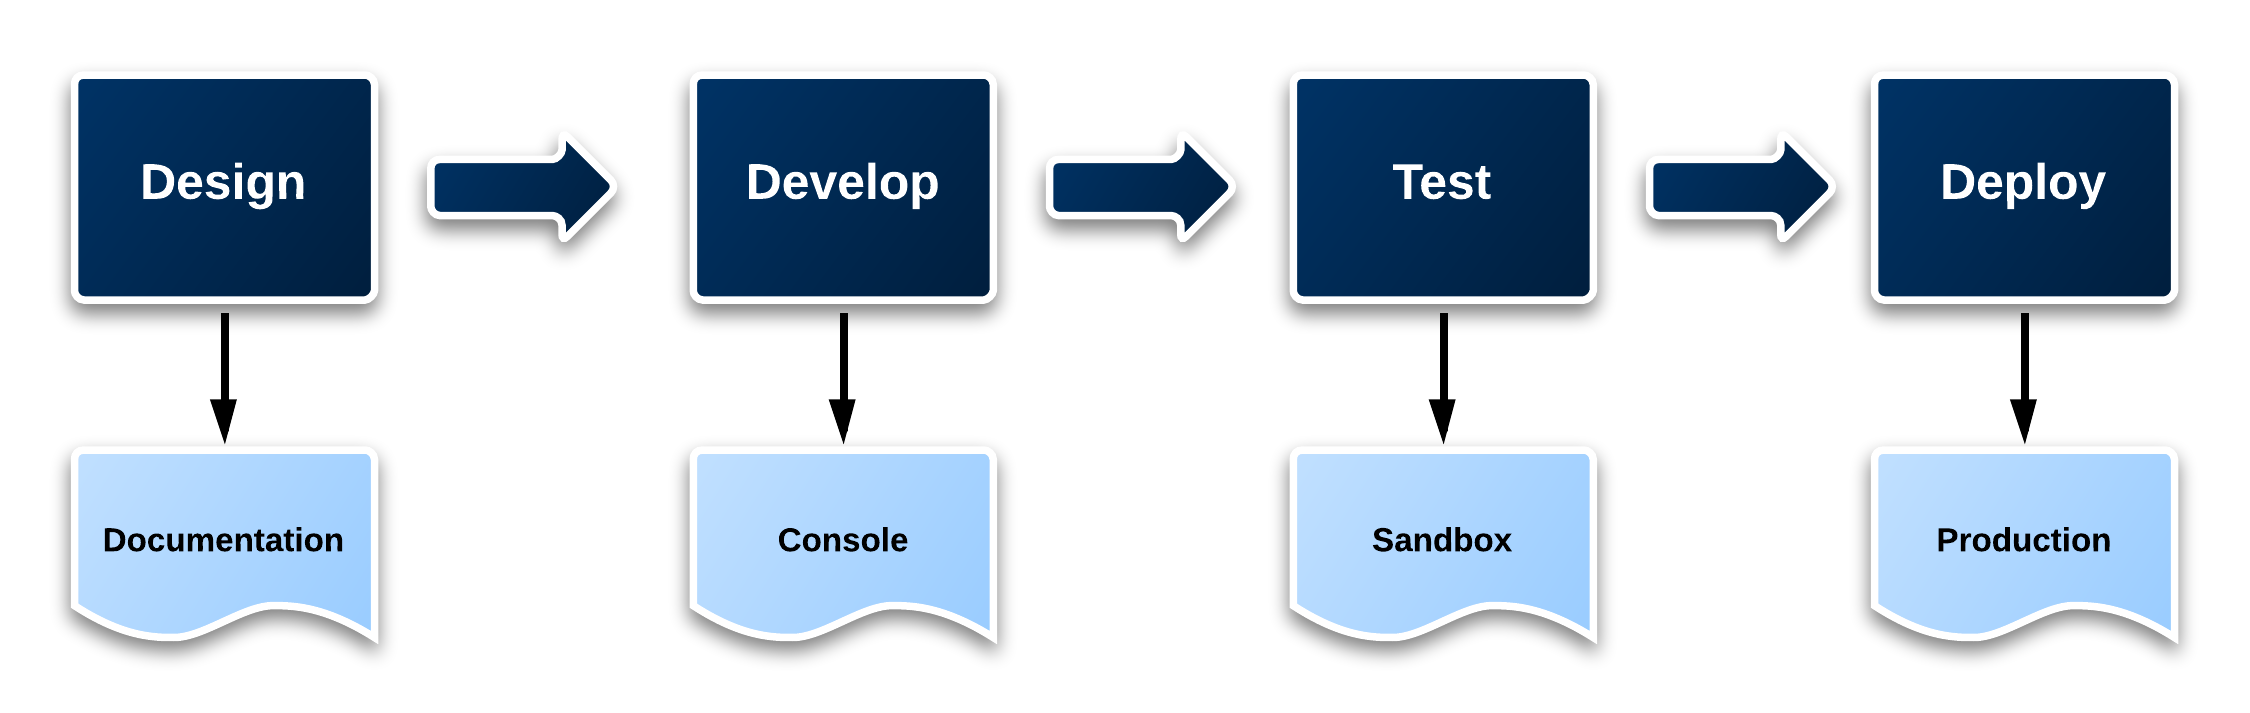 Figure 7 - Development Lifecycle in the Cloud